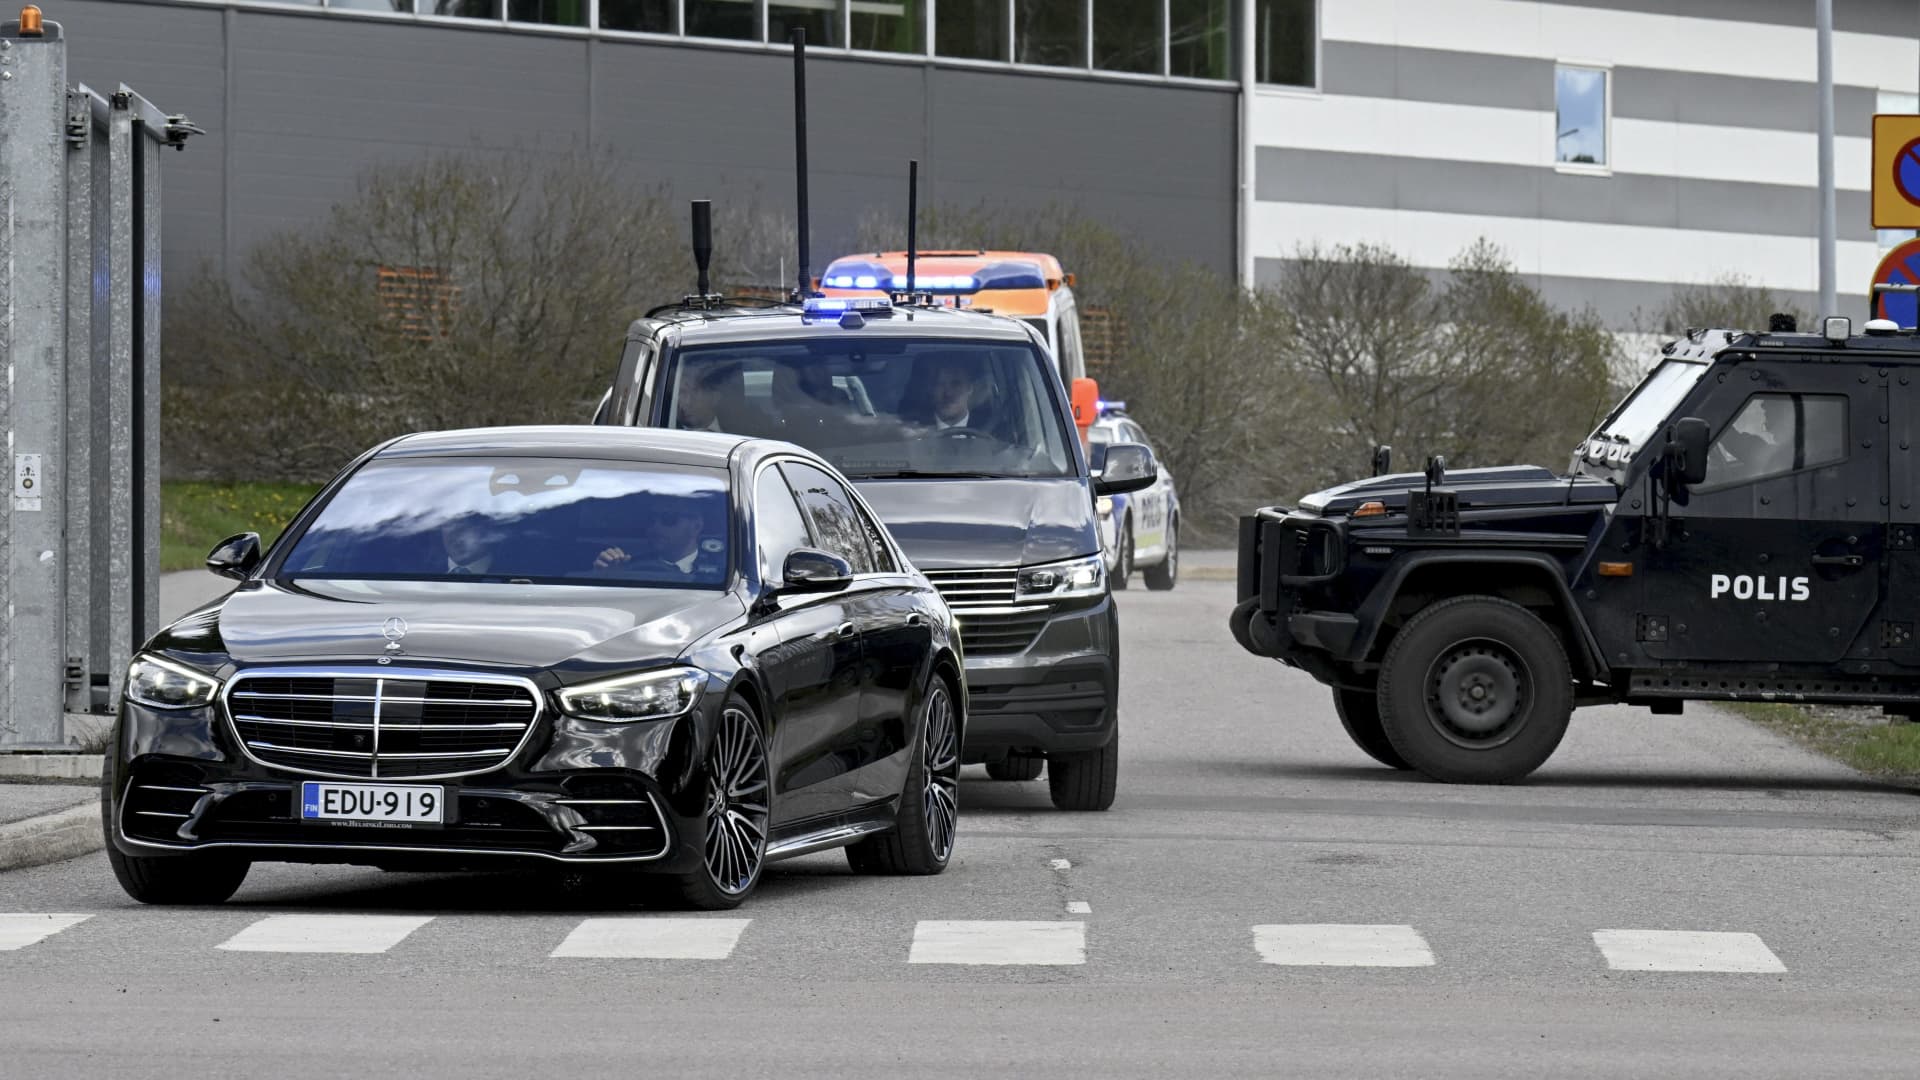 The motorcade with Ukrainian President Volodymyr Zelenskyy leaves the Helsinki-Vantaa airport in Vantaa, Finland on May 3, 2023. Zelenskyy will participate in a summit gathering the leaders of the five Nordic nations, the Finnish presidency announced.